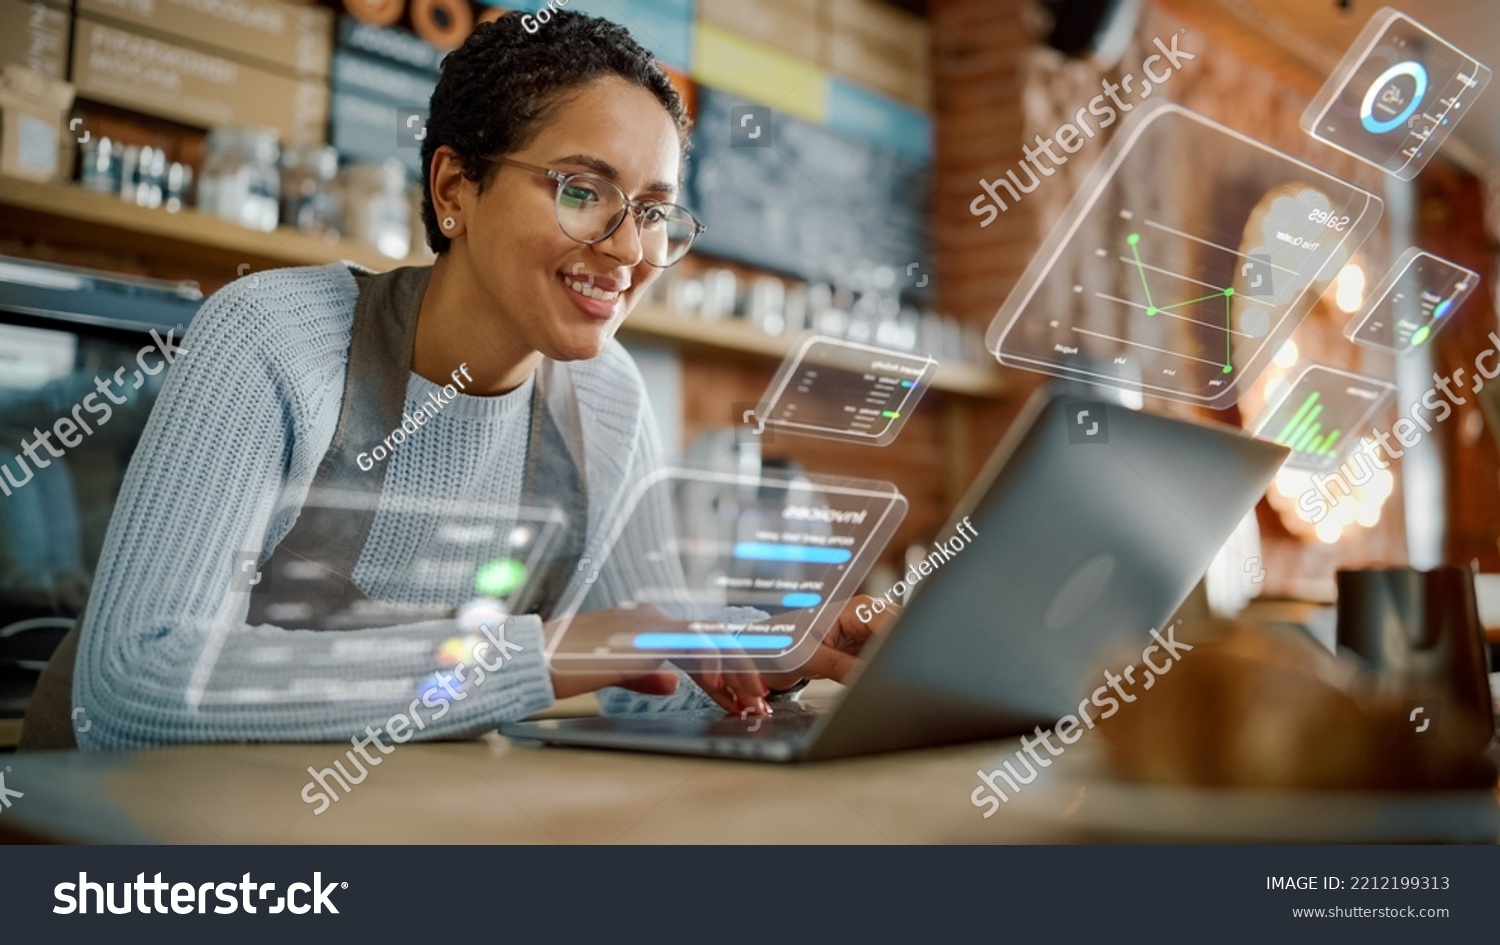 Beautiful Latina Coffee Shop Owner is Working on Laptop Computer and Checking Inventory in a Cozy Cafe. Restaurant Manager Browsing Internet and Chatting with Friends. VFX Augmented Reality Concept. #2212199313